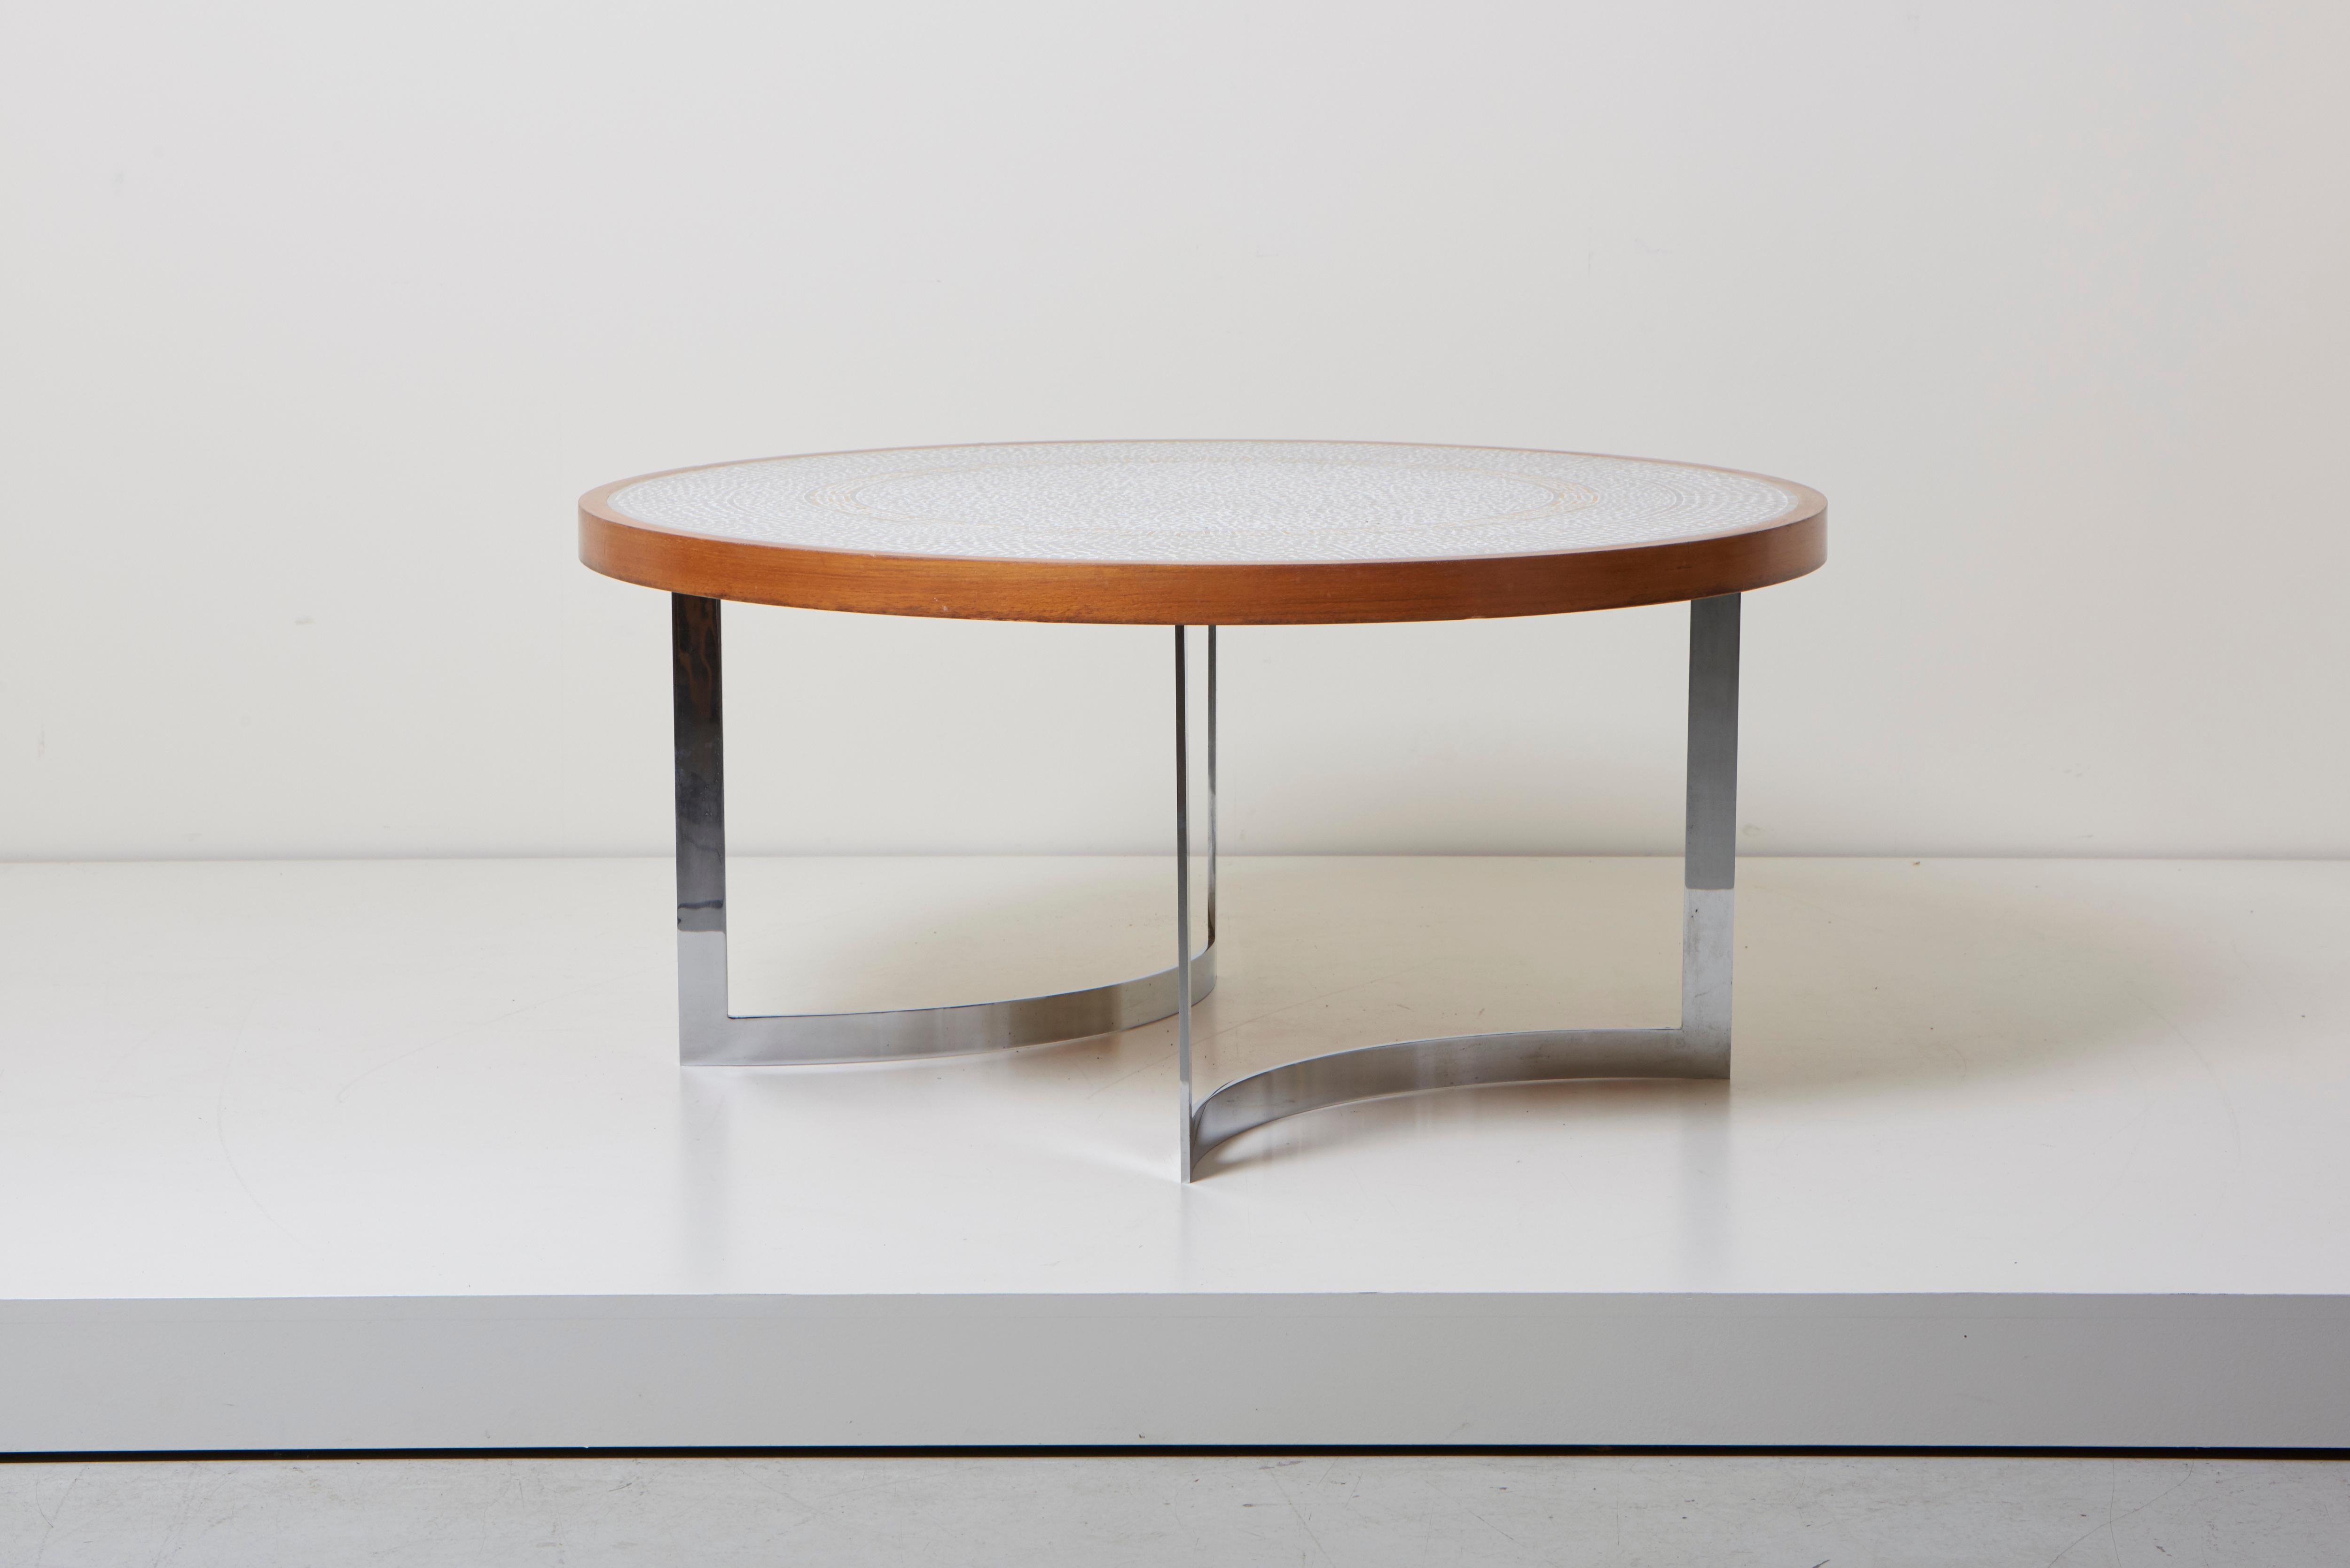 Huge round coffee table designed by the German designer Berthold Müller, Germany, 1967.
The table has chrome legs and a walnut frame. The top has white ceramic stones combined with round pattern.
A great eyecatcher for a modern, antique,